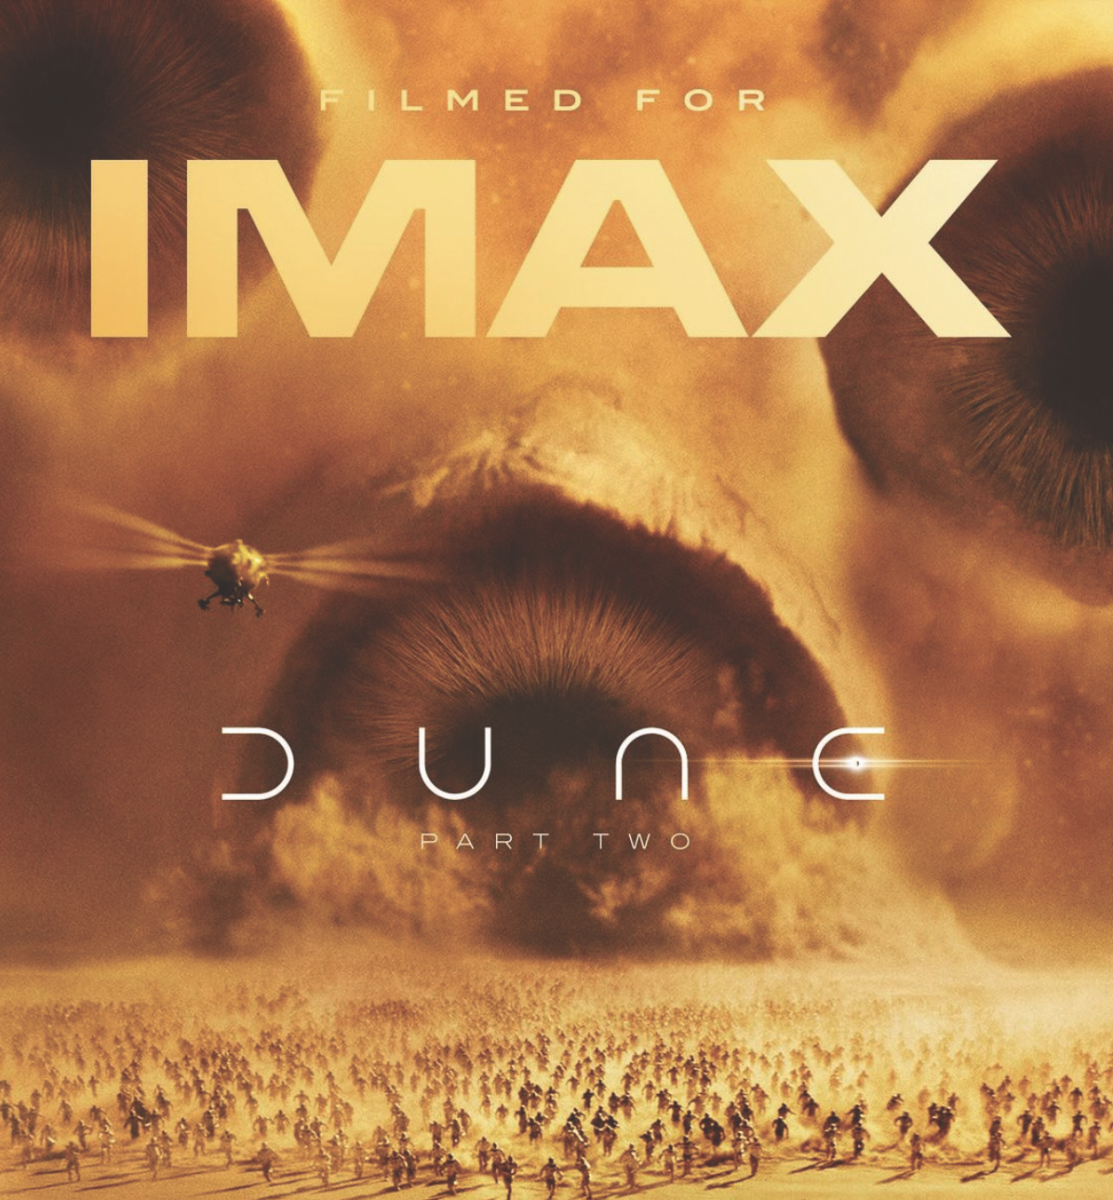 The poster advertising Dune 2 playing in IMAX theatres.